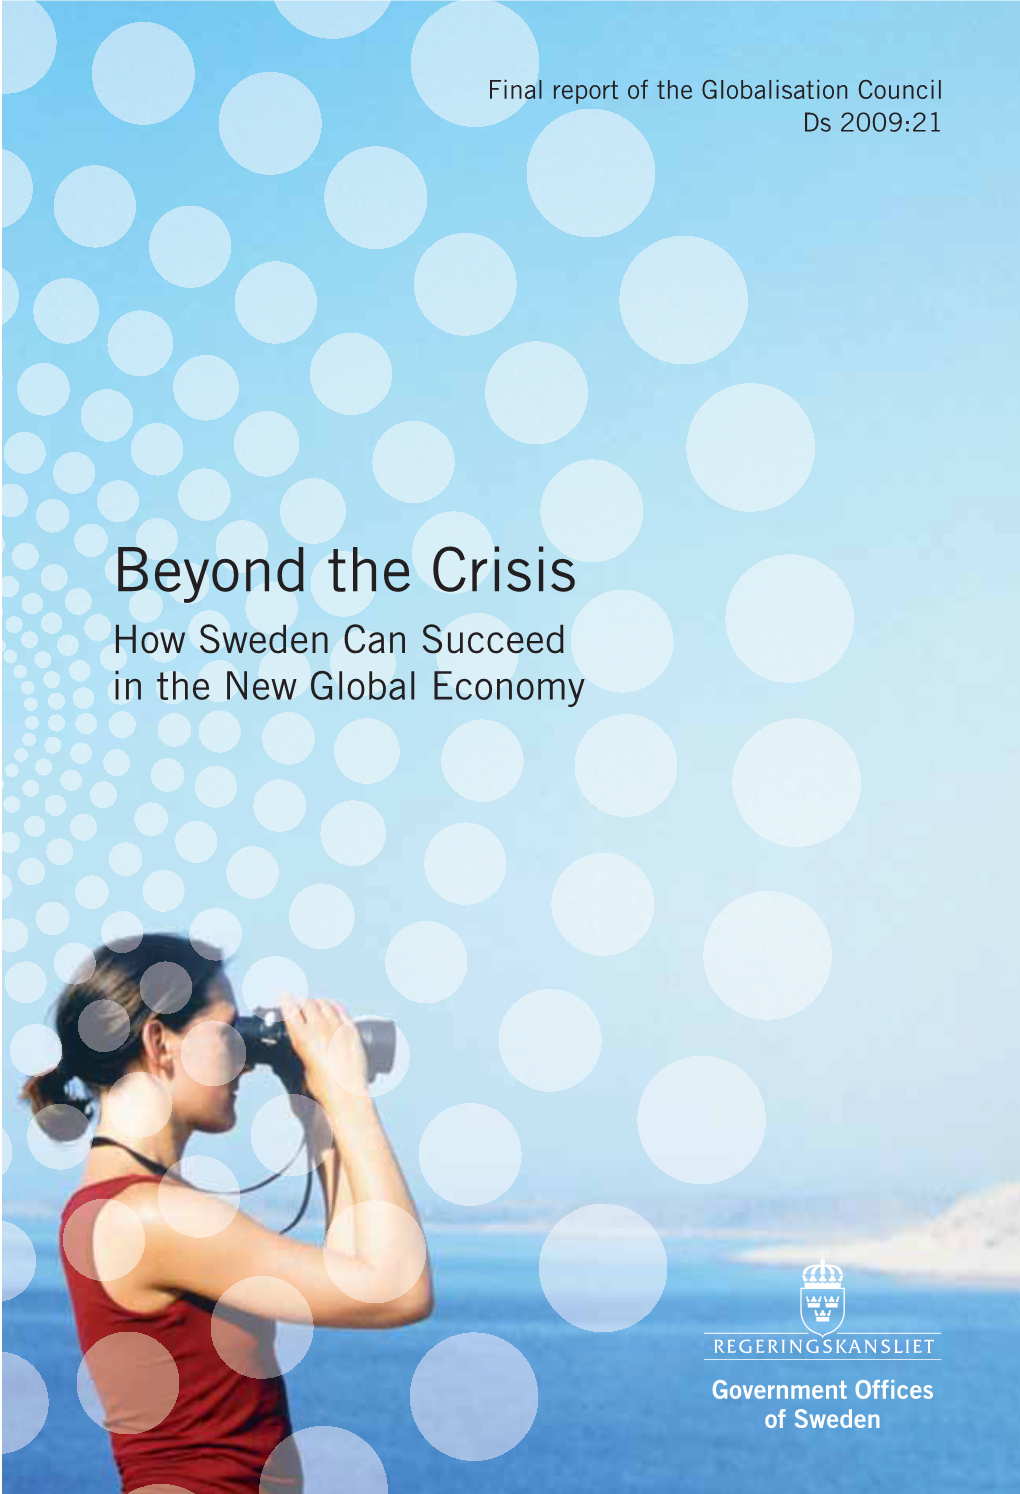 Beyond the Crisis. How Sweden Can Succeed in the New Global Economy, 2009:21